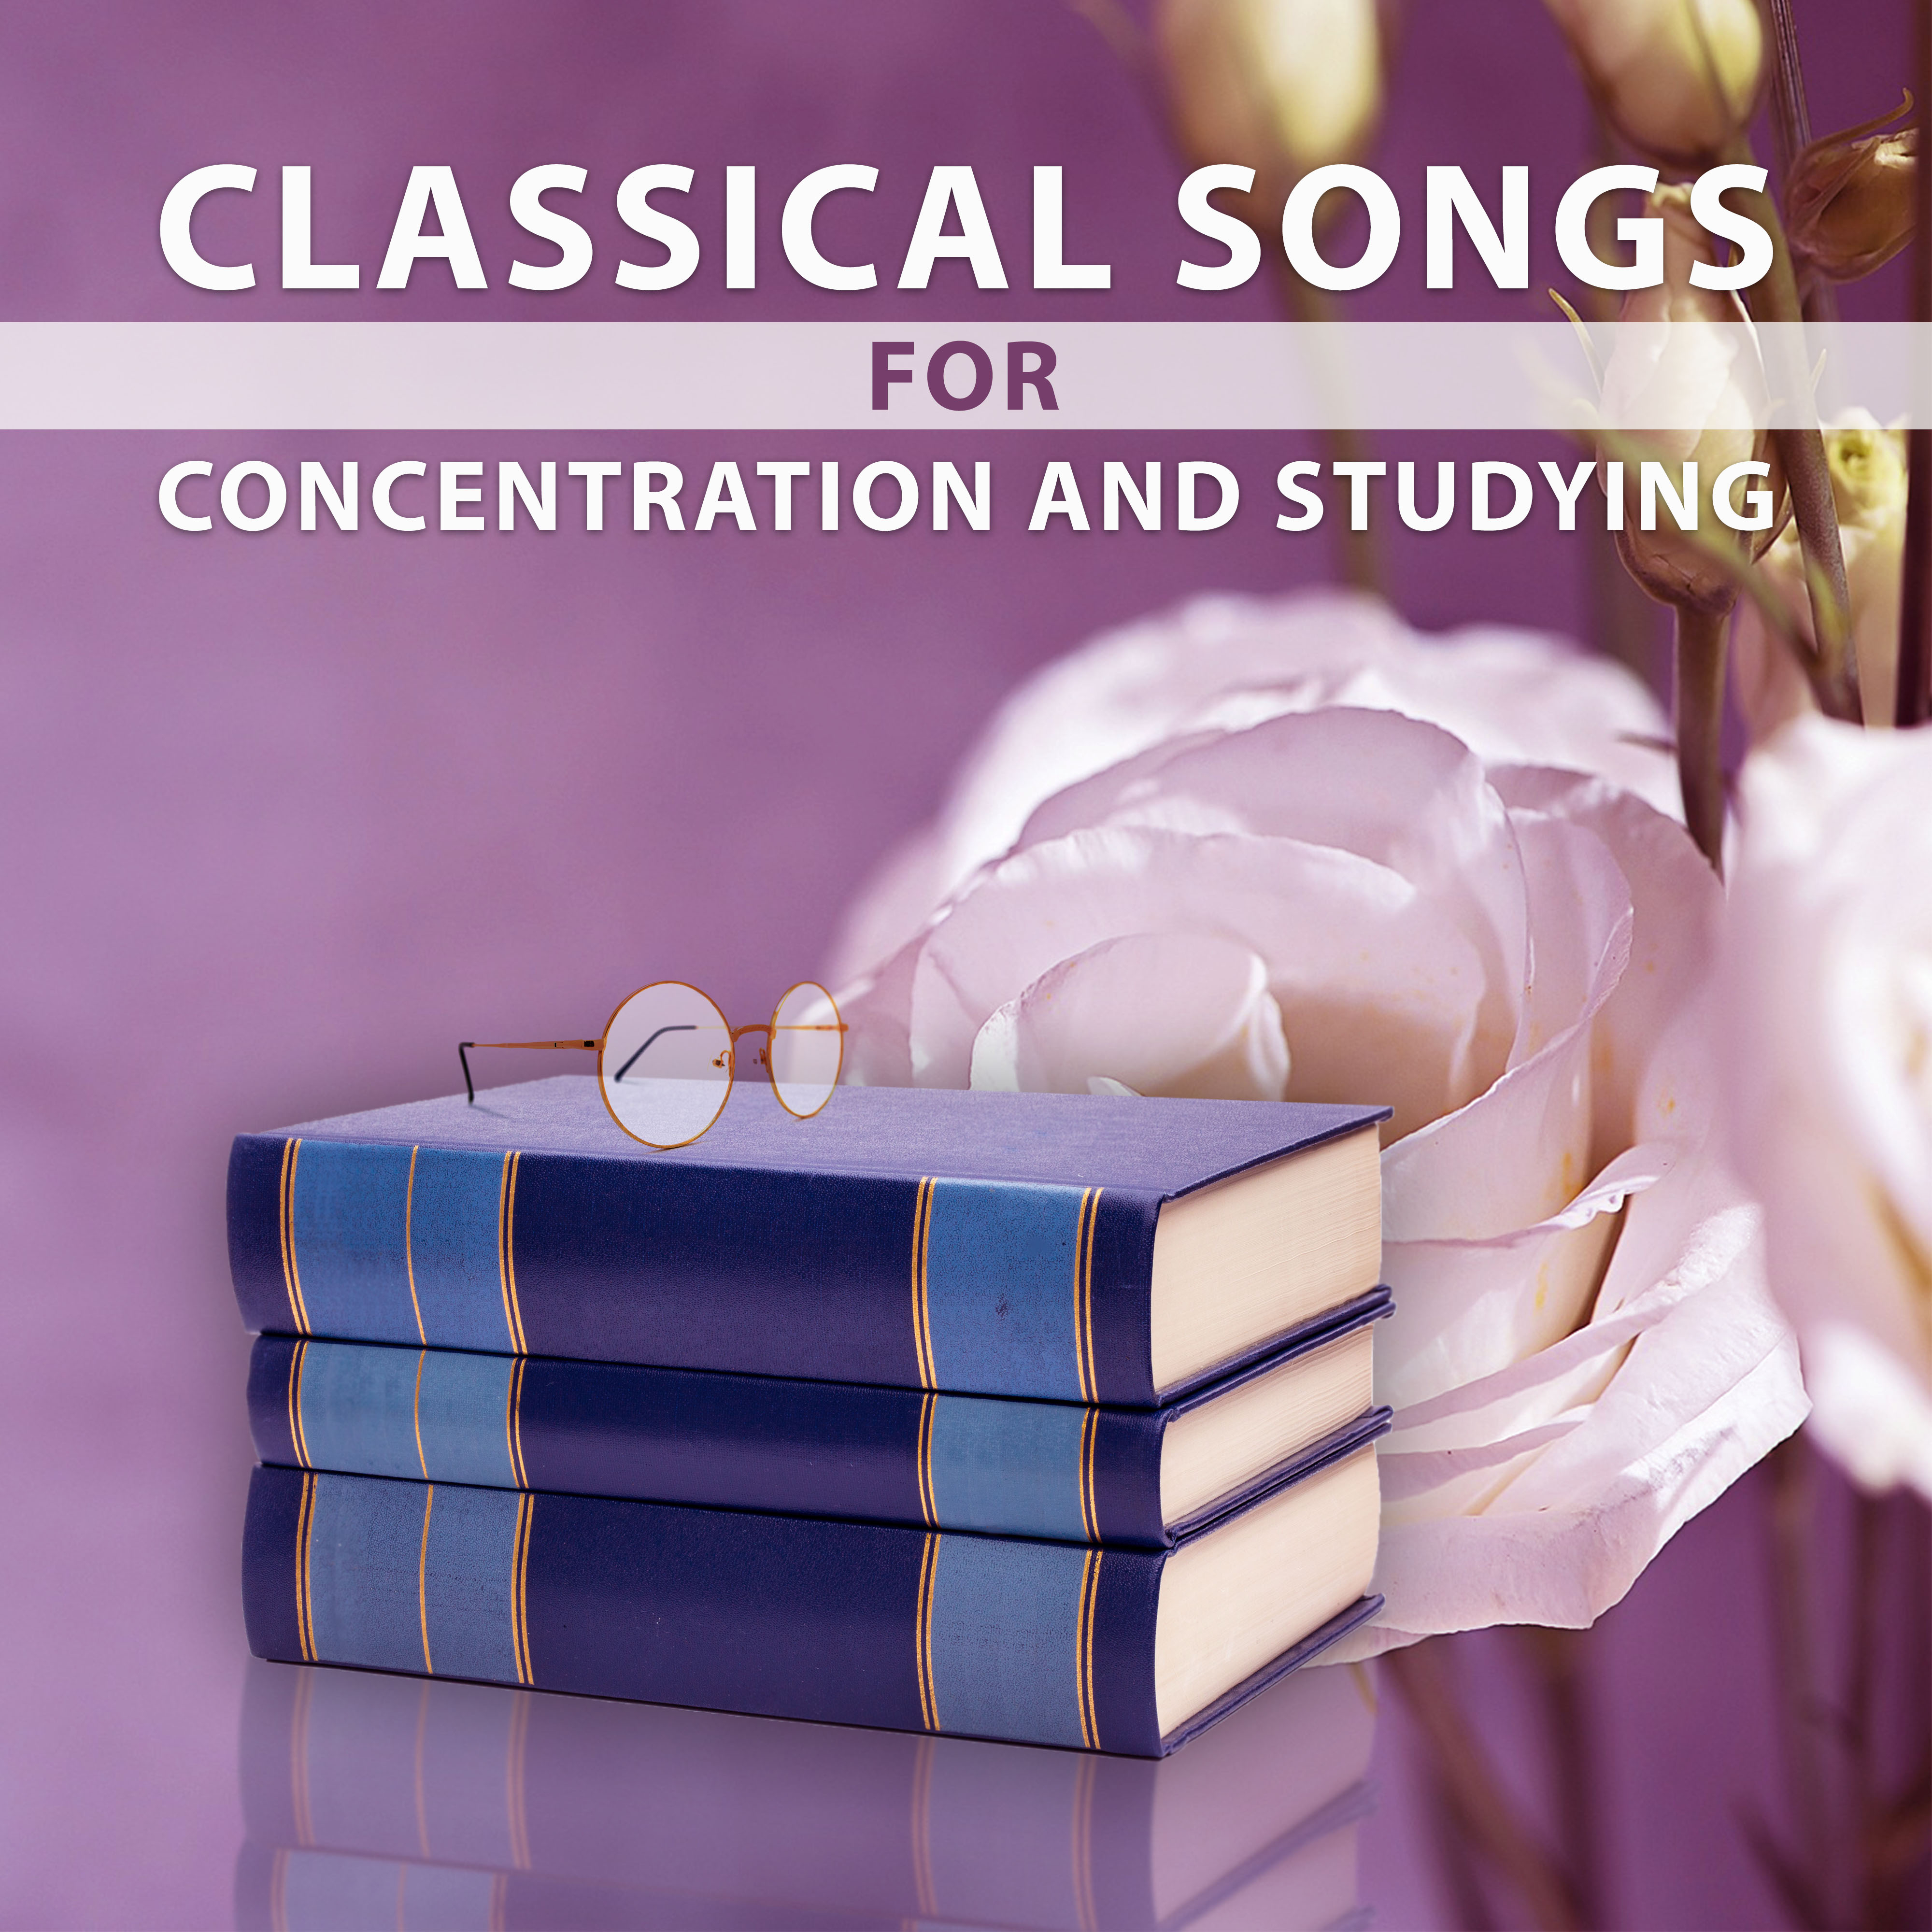 Classical Songs to Concentration and Study  Classical Composers to Study, Music to Listening, Concentration Music, Composers to Work, Effective Learning, Mozart, Beethoven